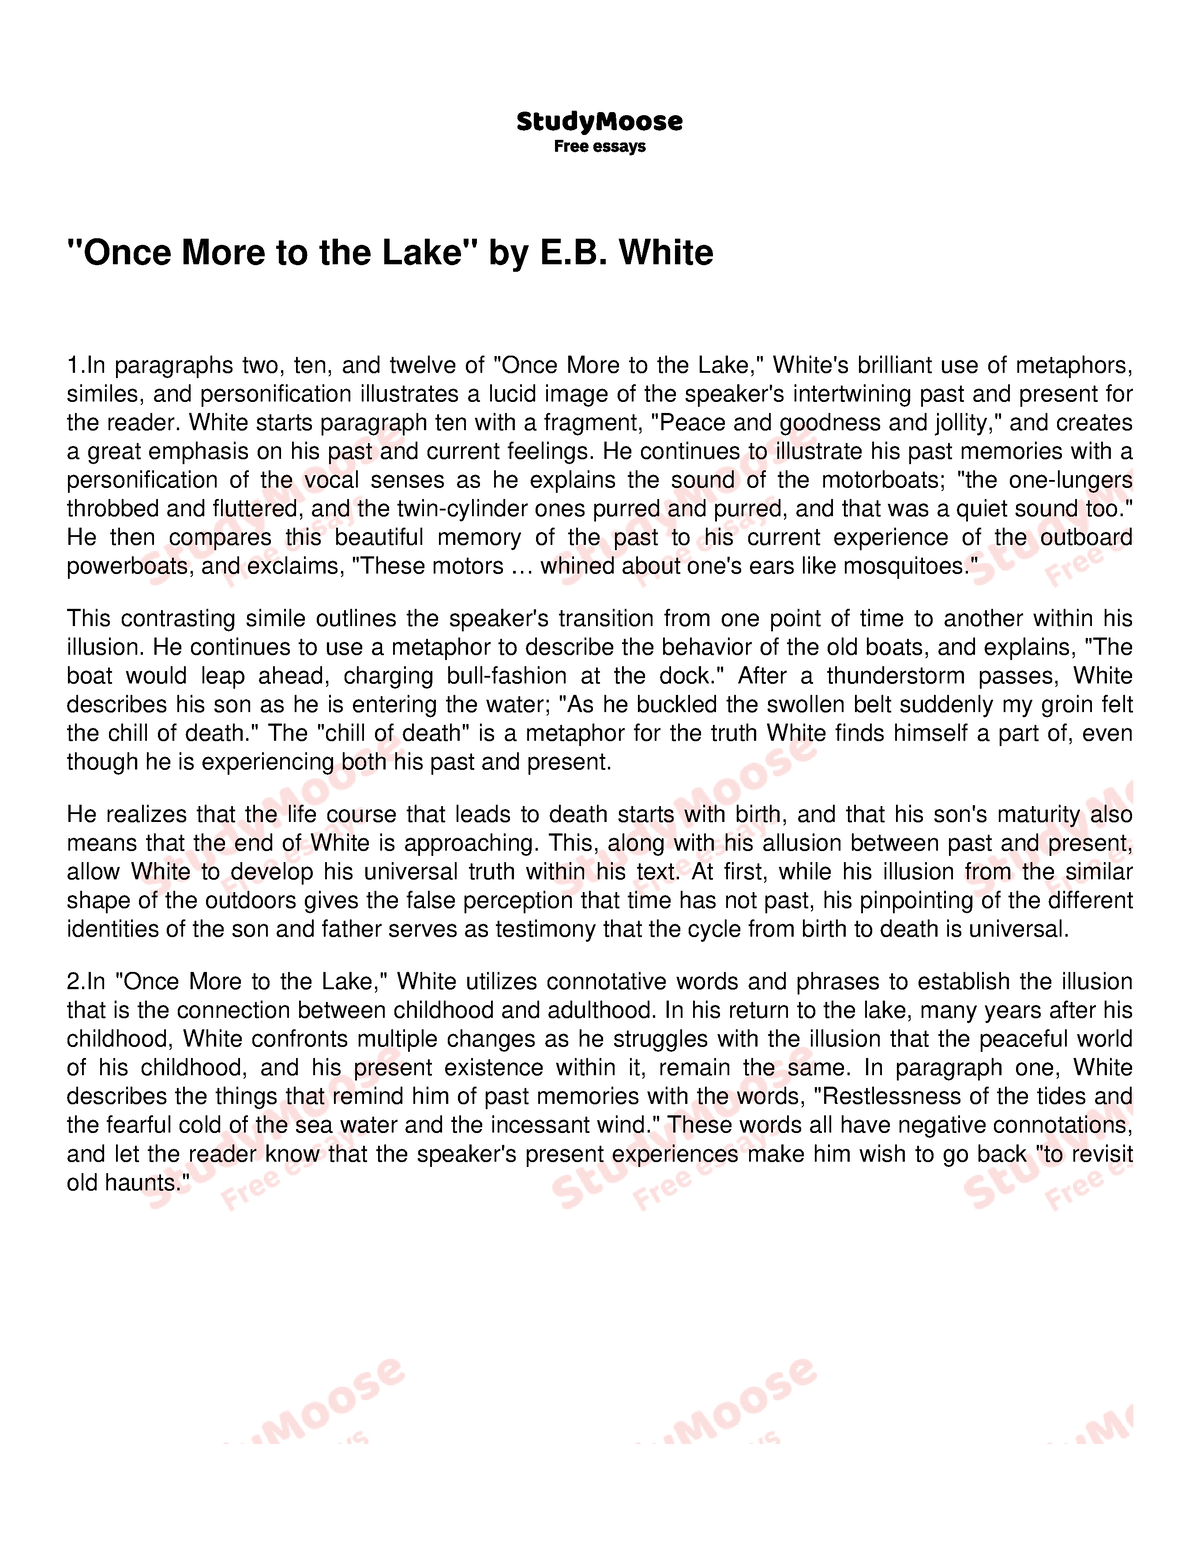 what is the thesis of once more to the lake